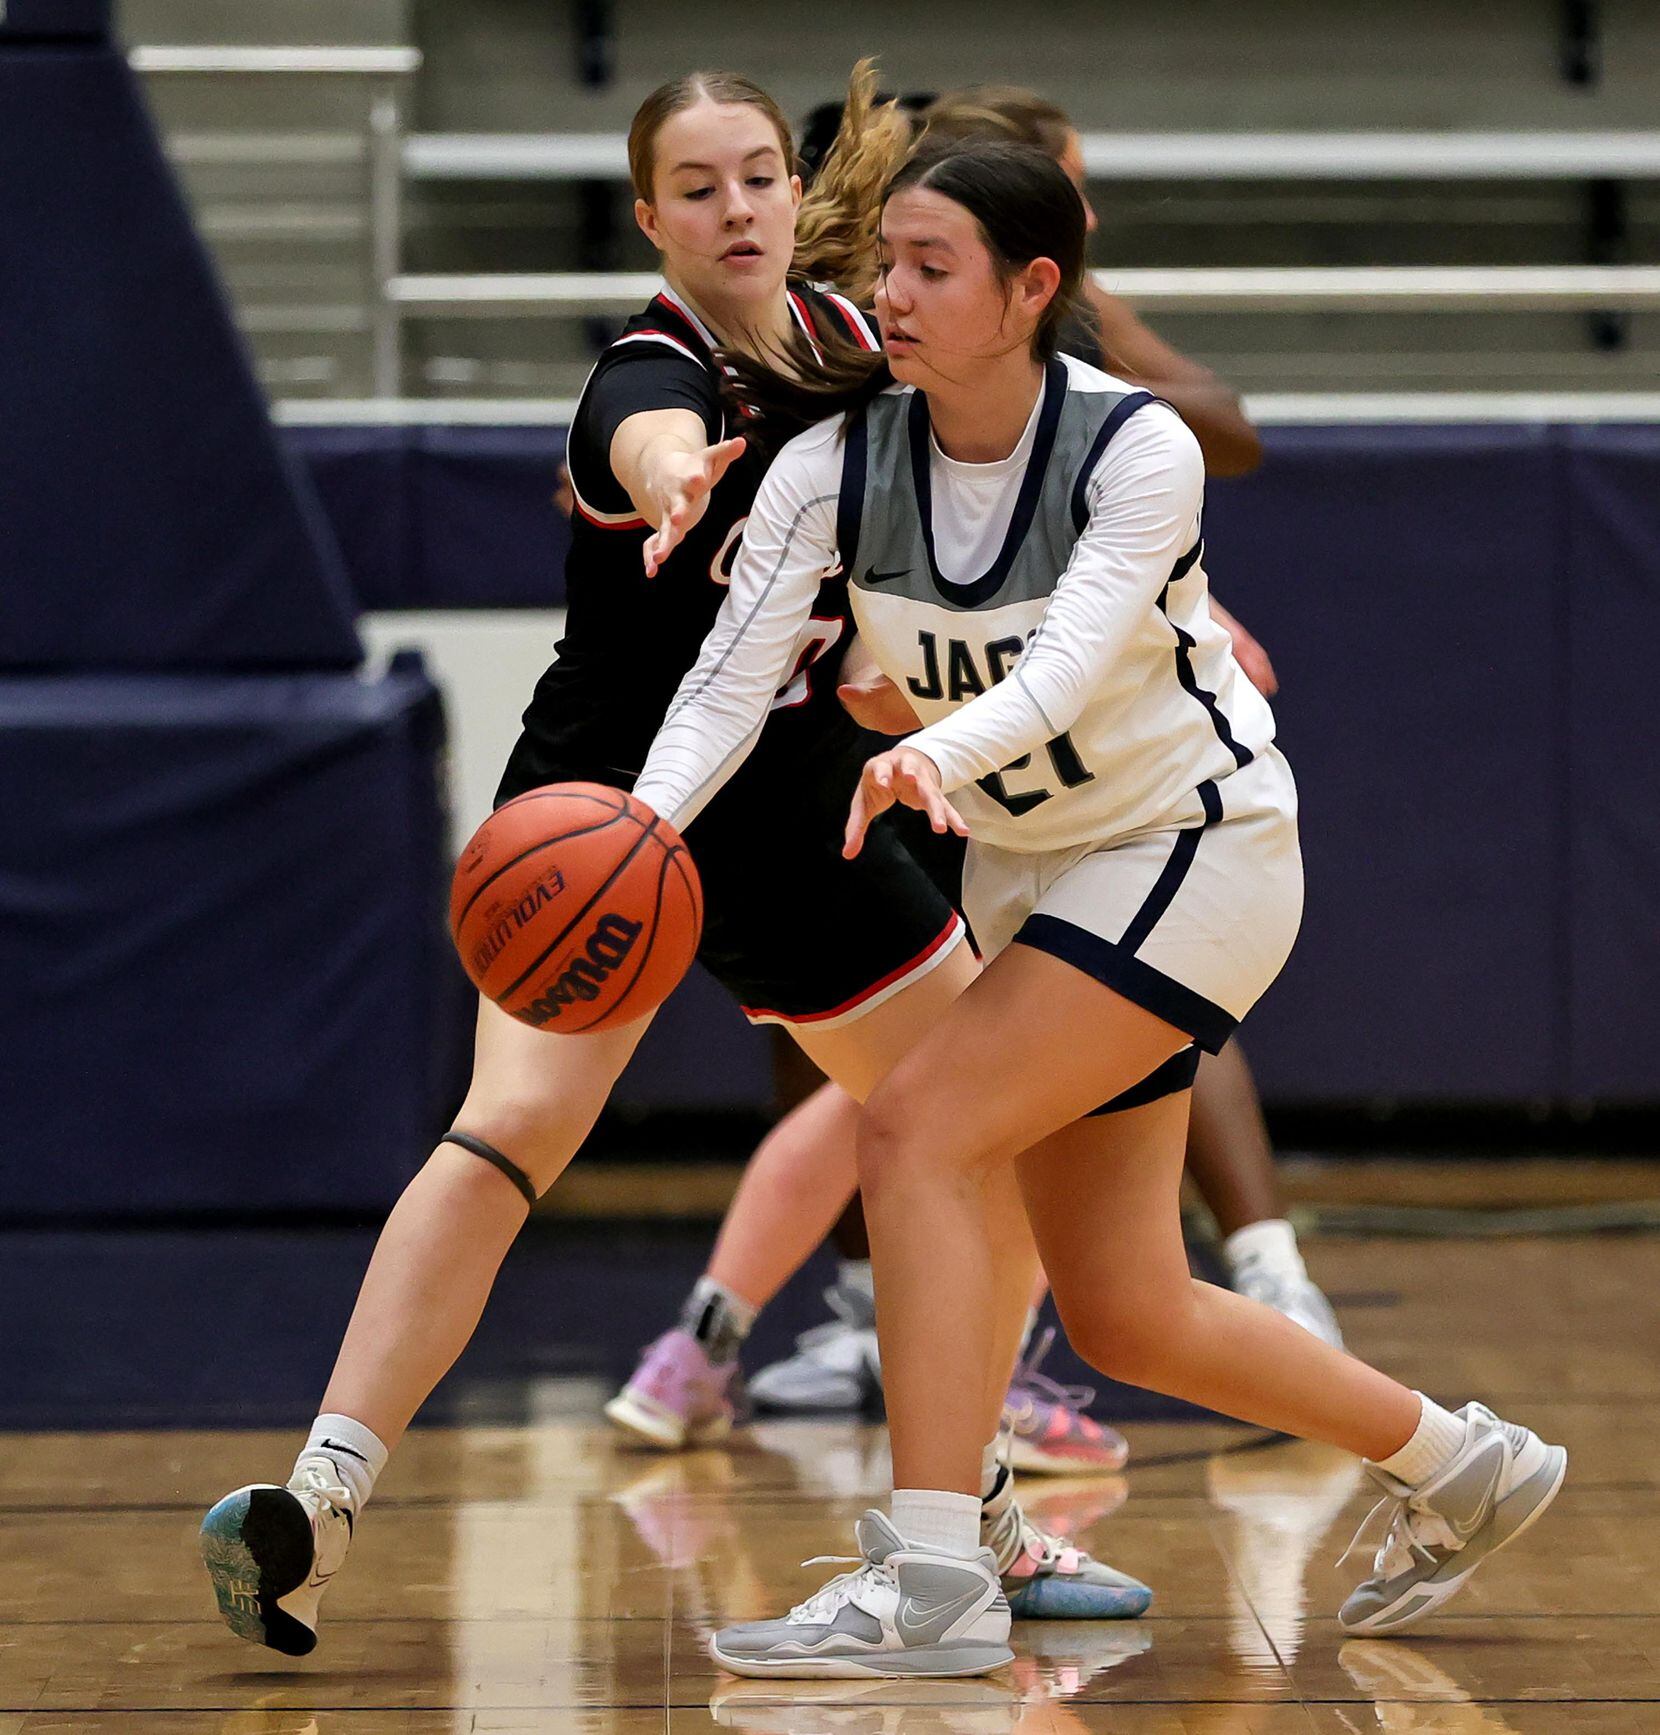 Flower Mound guard Kaitlyn Meche (21) tries to make a pass against Coppell guard Landry...